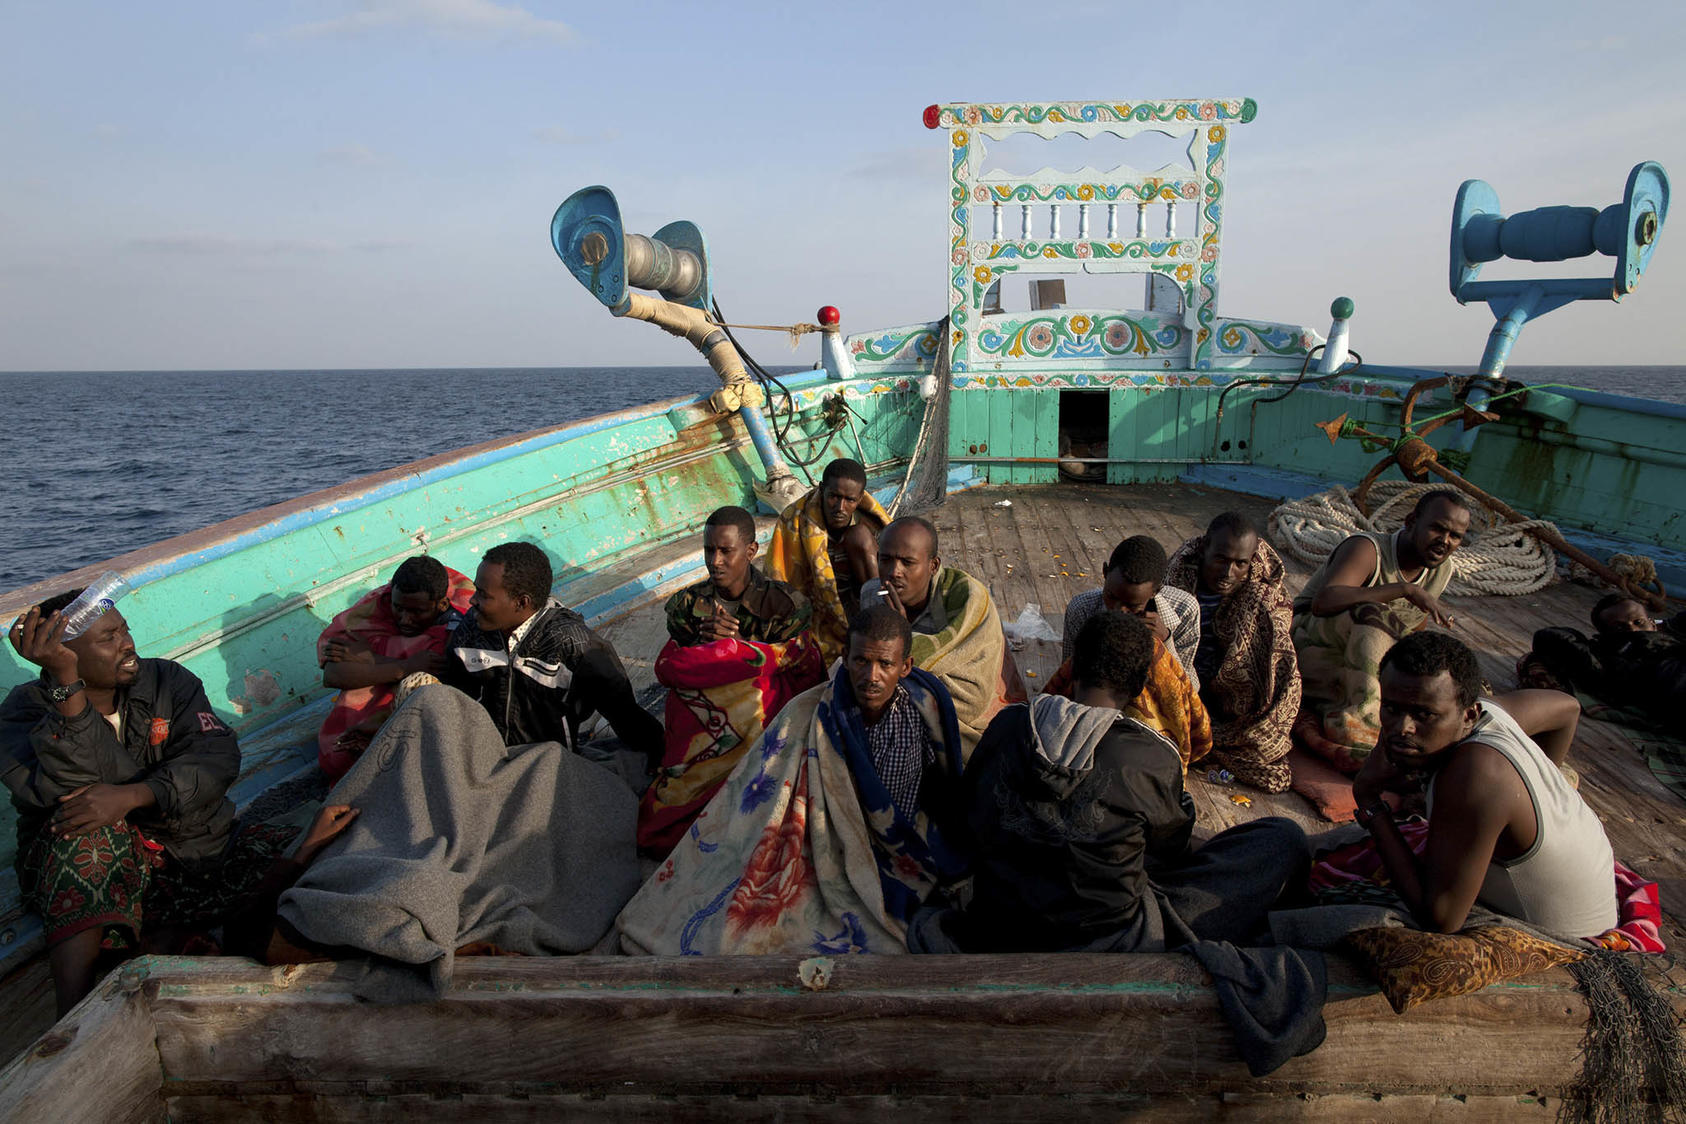 Somali pirates on a fishing vessel where they were captured by members of the U.S. Navy in the Gulf of Oman, Jan. 6, 2012. The U.S. has celebrated its collaboration with industry to stop piracy off the coast of Somalia. (Tyler Hicks/The New York Times)